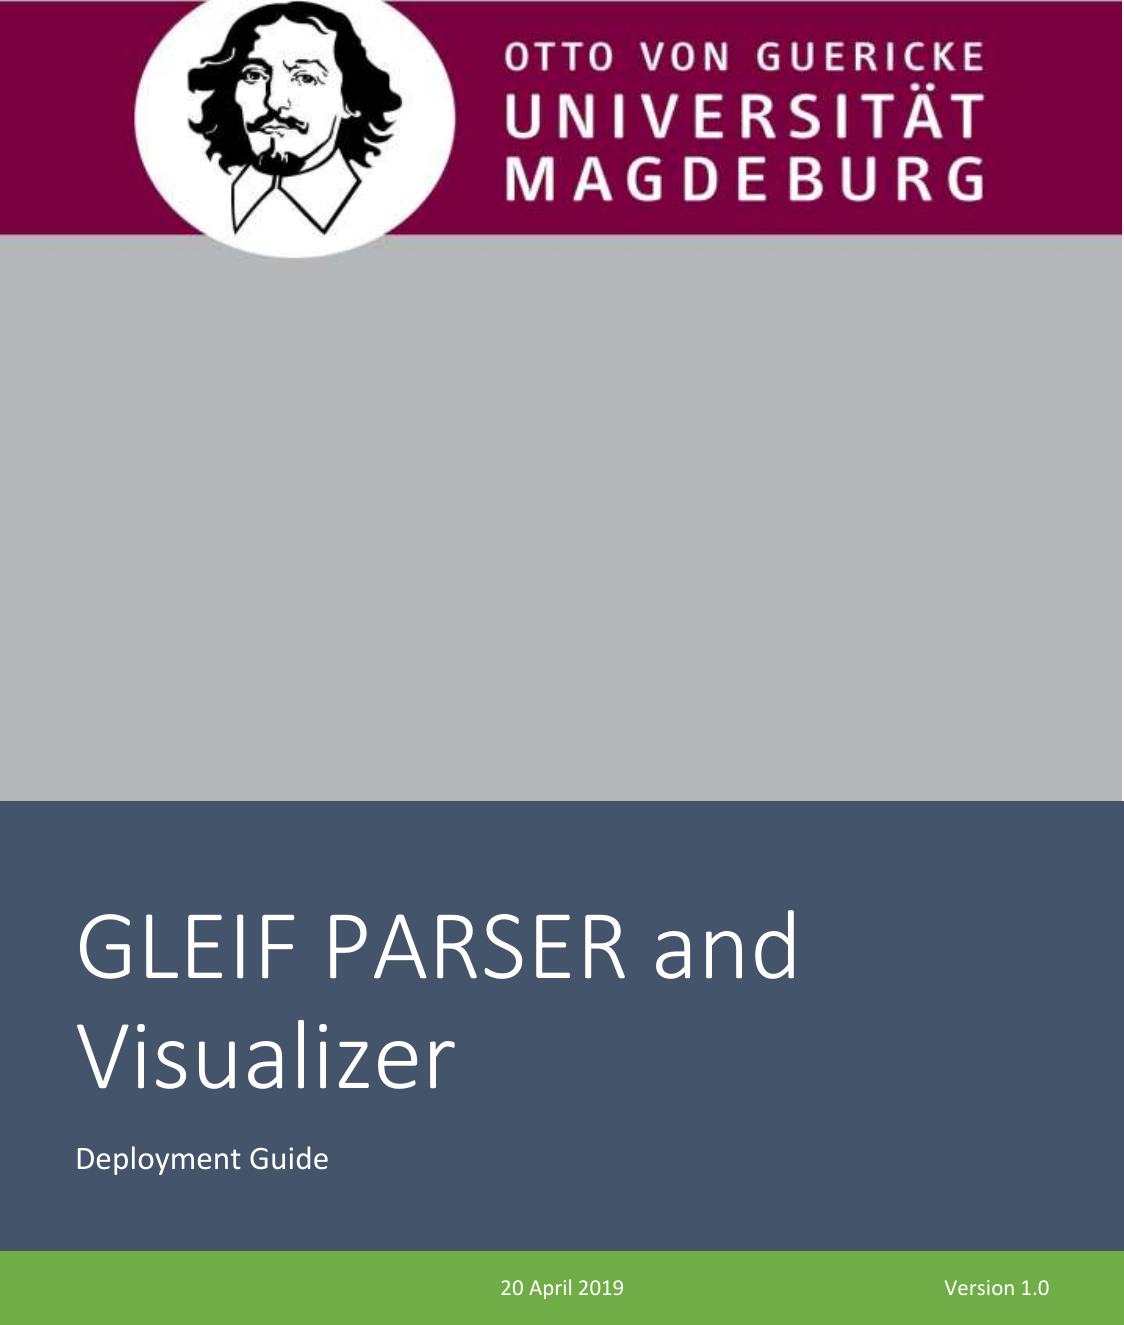 Page 1 of 9 - GLEIF PARSER And Visualizer Deployment Guide